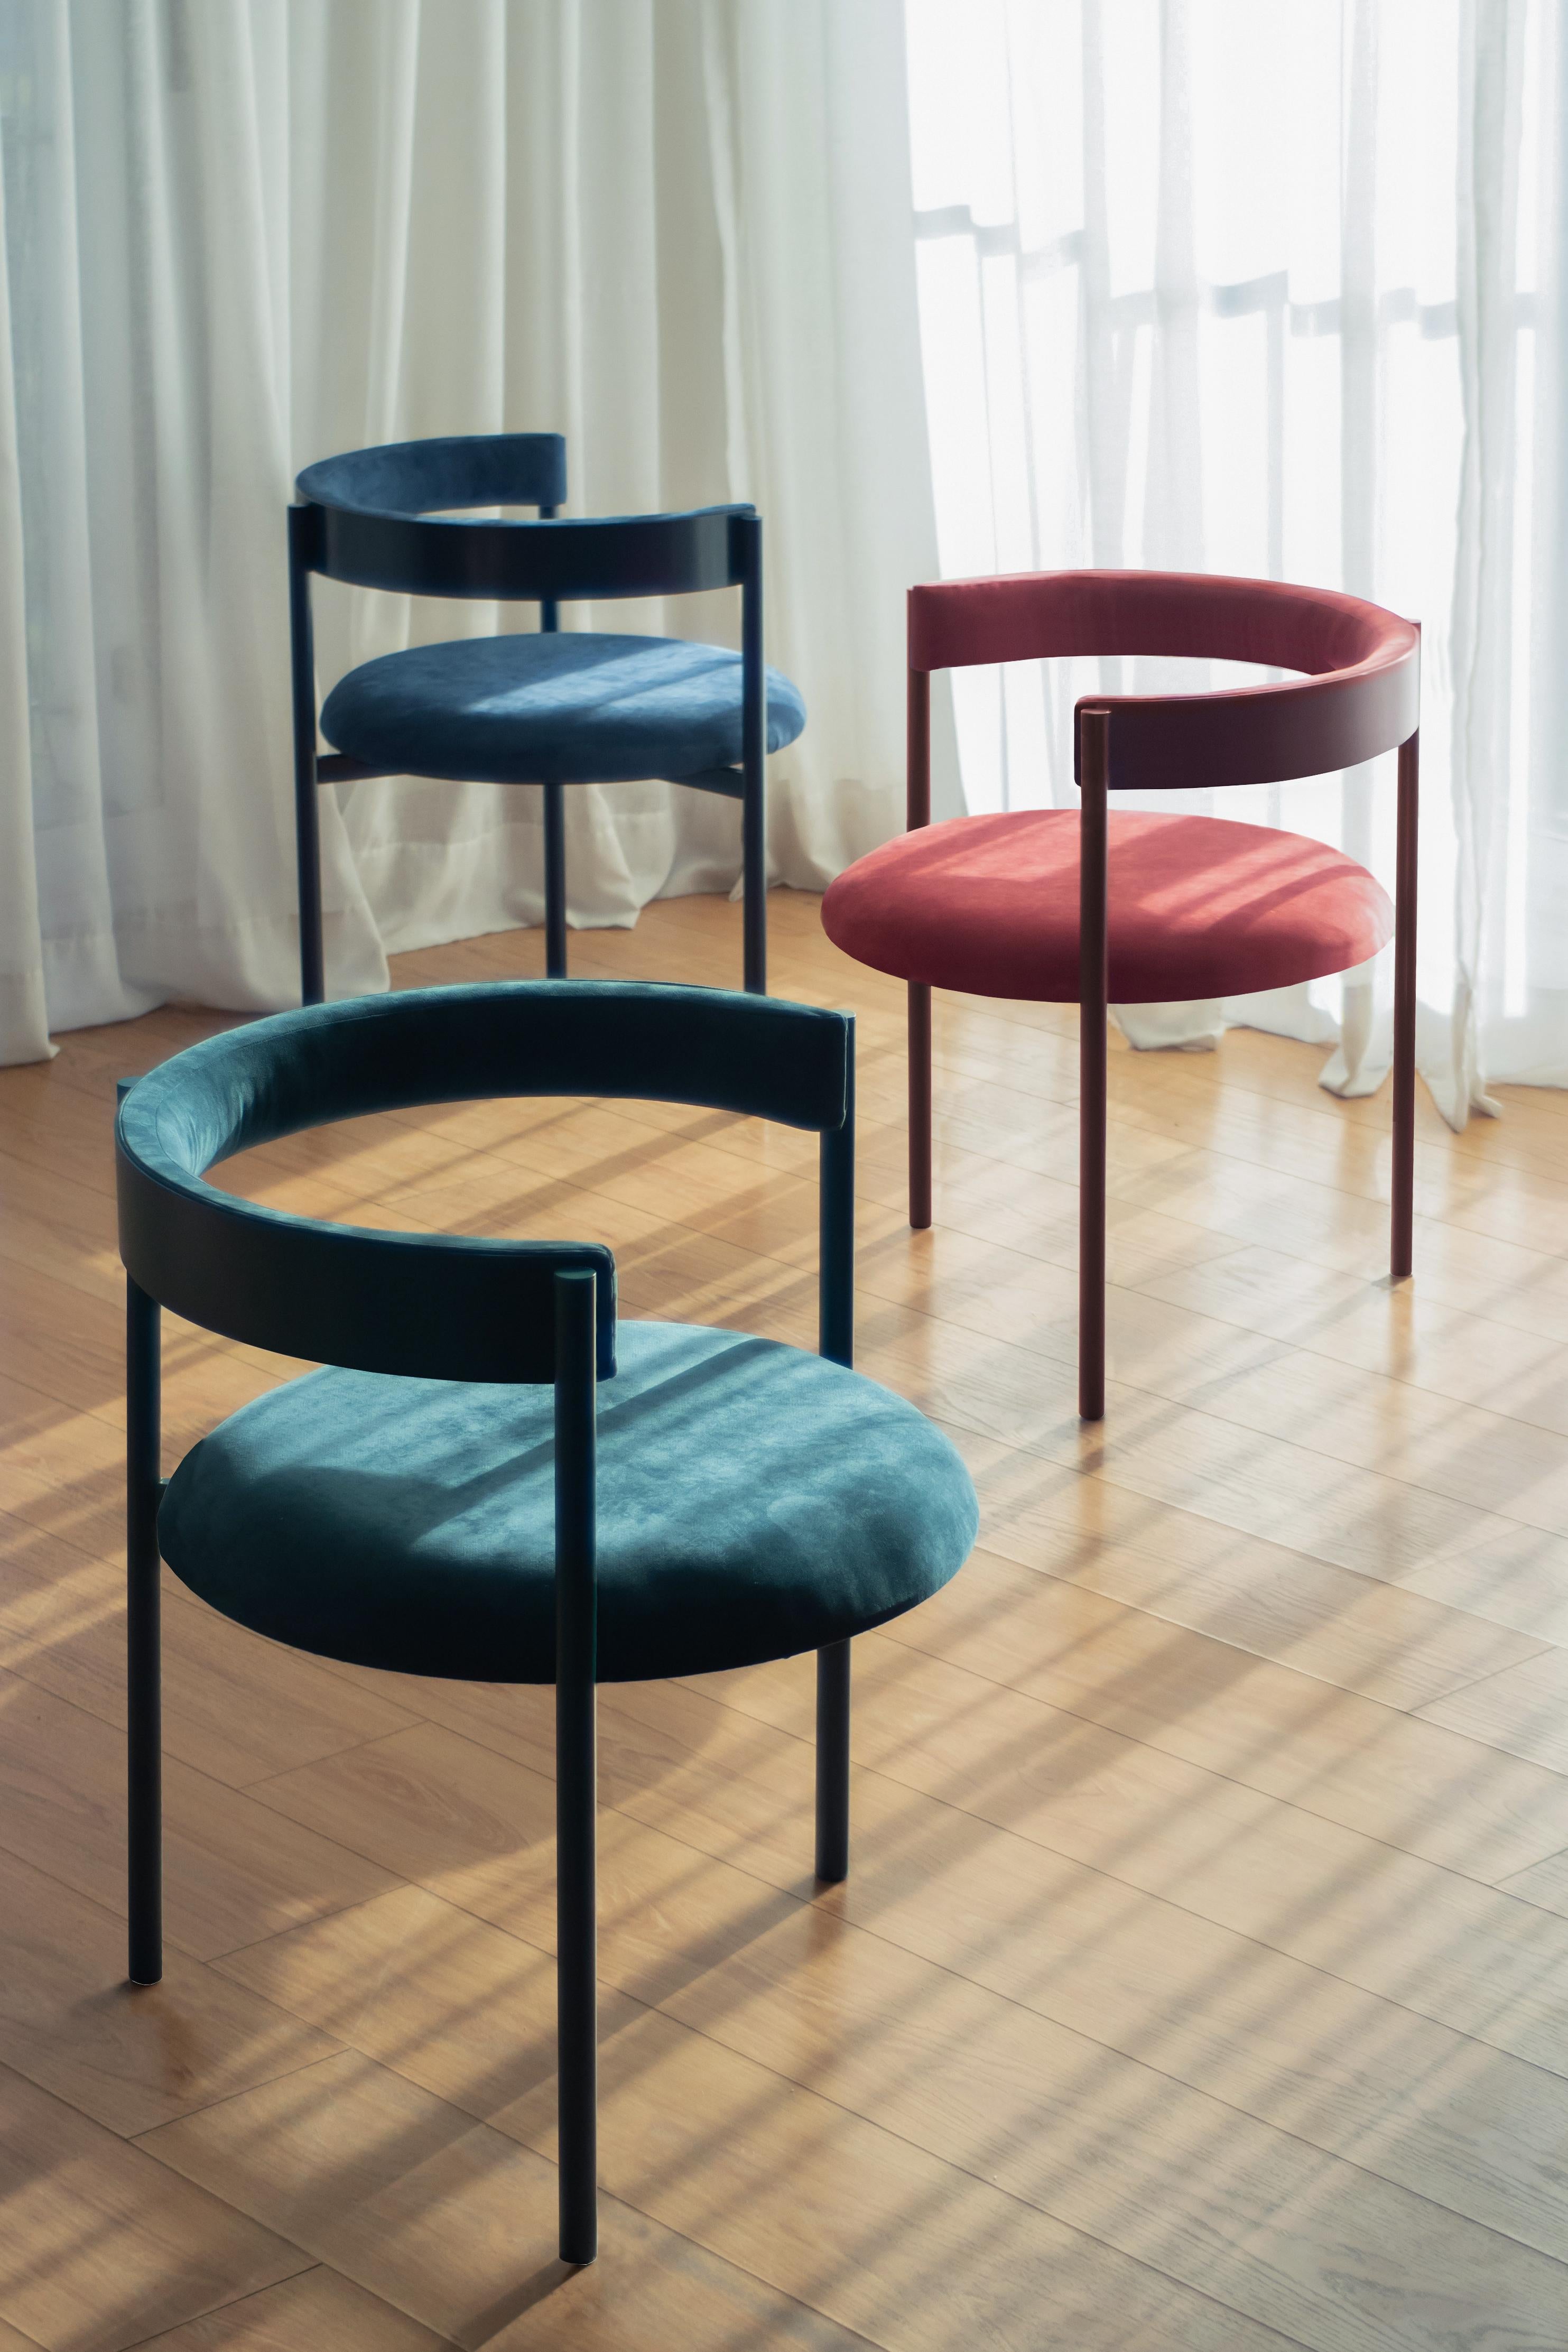 Set of 3 Aro chairs (Oceano, Merlot & Dark Blue) by Ries
Dimensions: W60 x D60 x H67,5 cm
Materials: round steel tube, high-density foam, and velvet upholstery

Also available: mika, pink and yellow.

Ries is a design studio based in Buenos